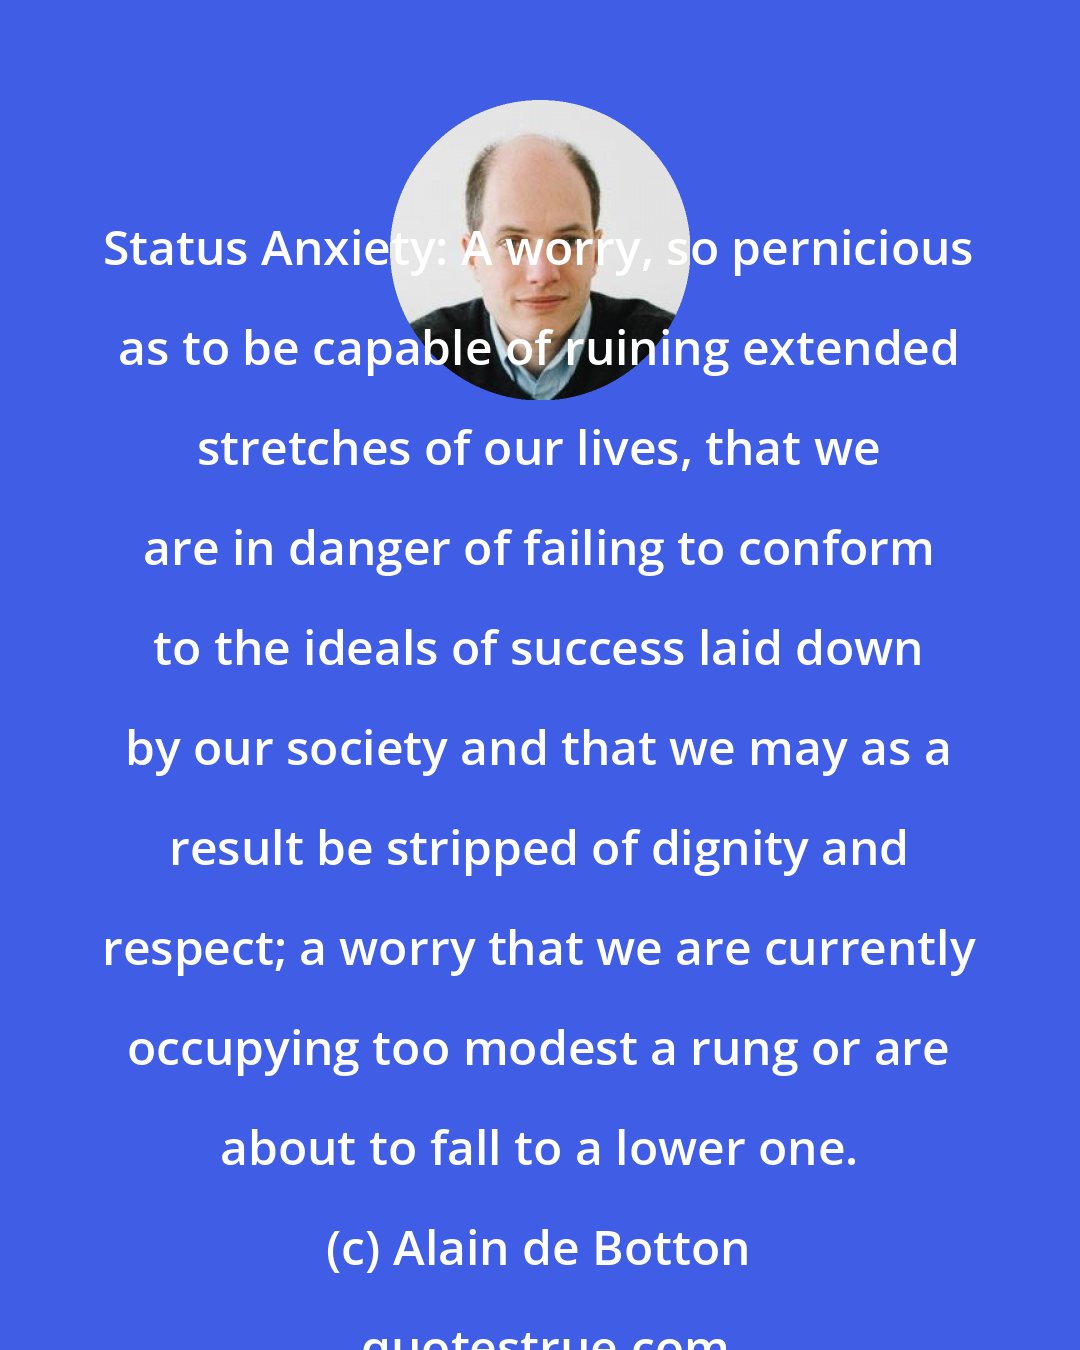 Alain de Botton: Status Anxiety: A worry, so pernicious as to be capable of ruining extended stretches of our lives, that we are in danger of failing to conform to the ideals of success laid down by our society and that we may as a result be stripped of dignity and respect; a worry that we are currently occupying too modest a rung or are about to fall to a lower one.